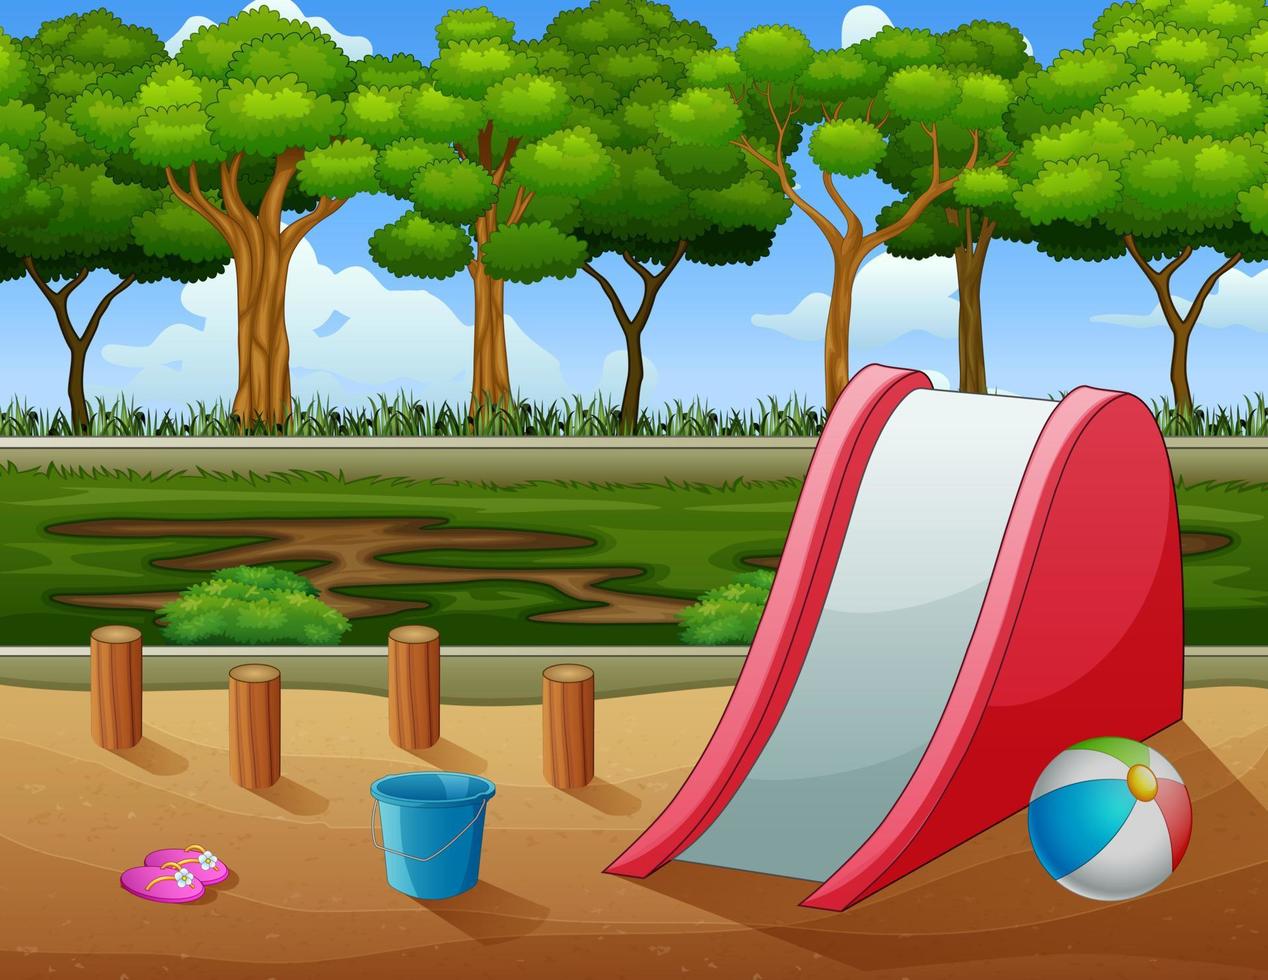 An outdoor scene with slide and toys vector